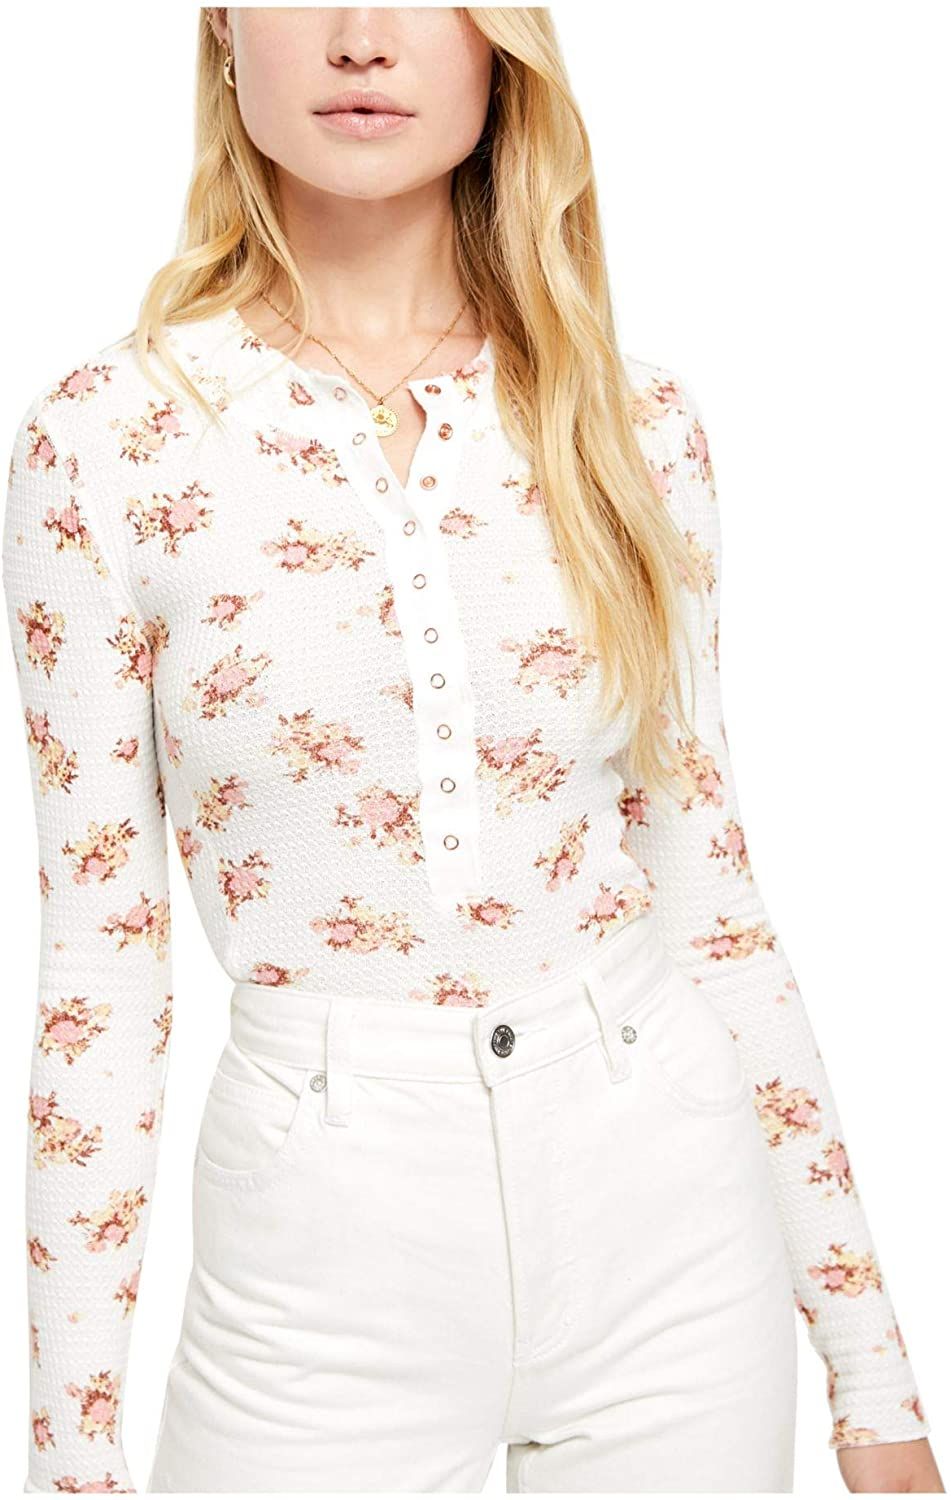 Color: Whites Size Type: Regular Size (Women's): S Sleeve Length: Long Sleeve Type: T-Shirt Style: Knit Top Neckline: Round Neck Pattern: Floral Theme: Colorful Material: Rayon